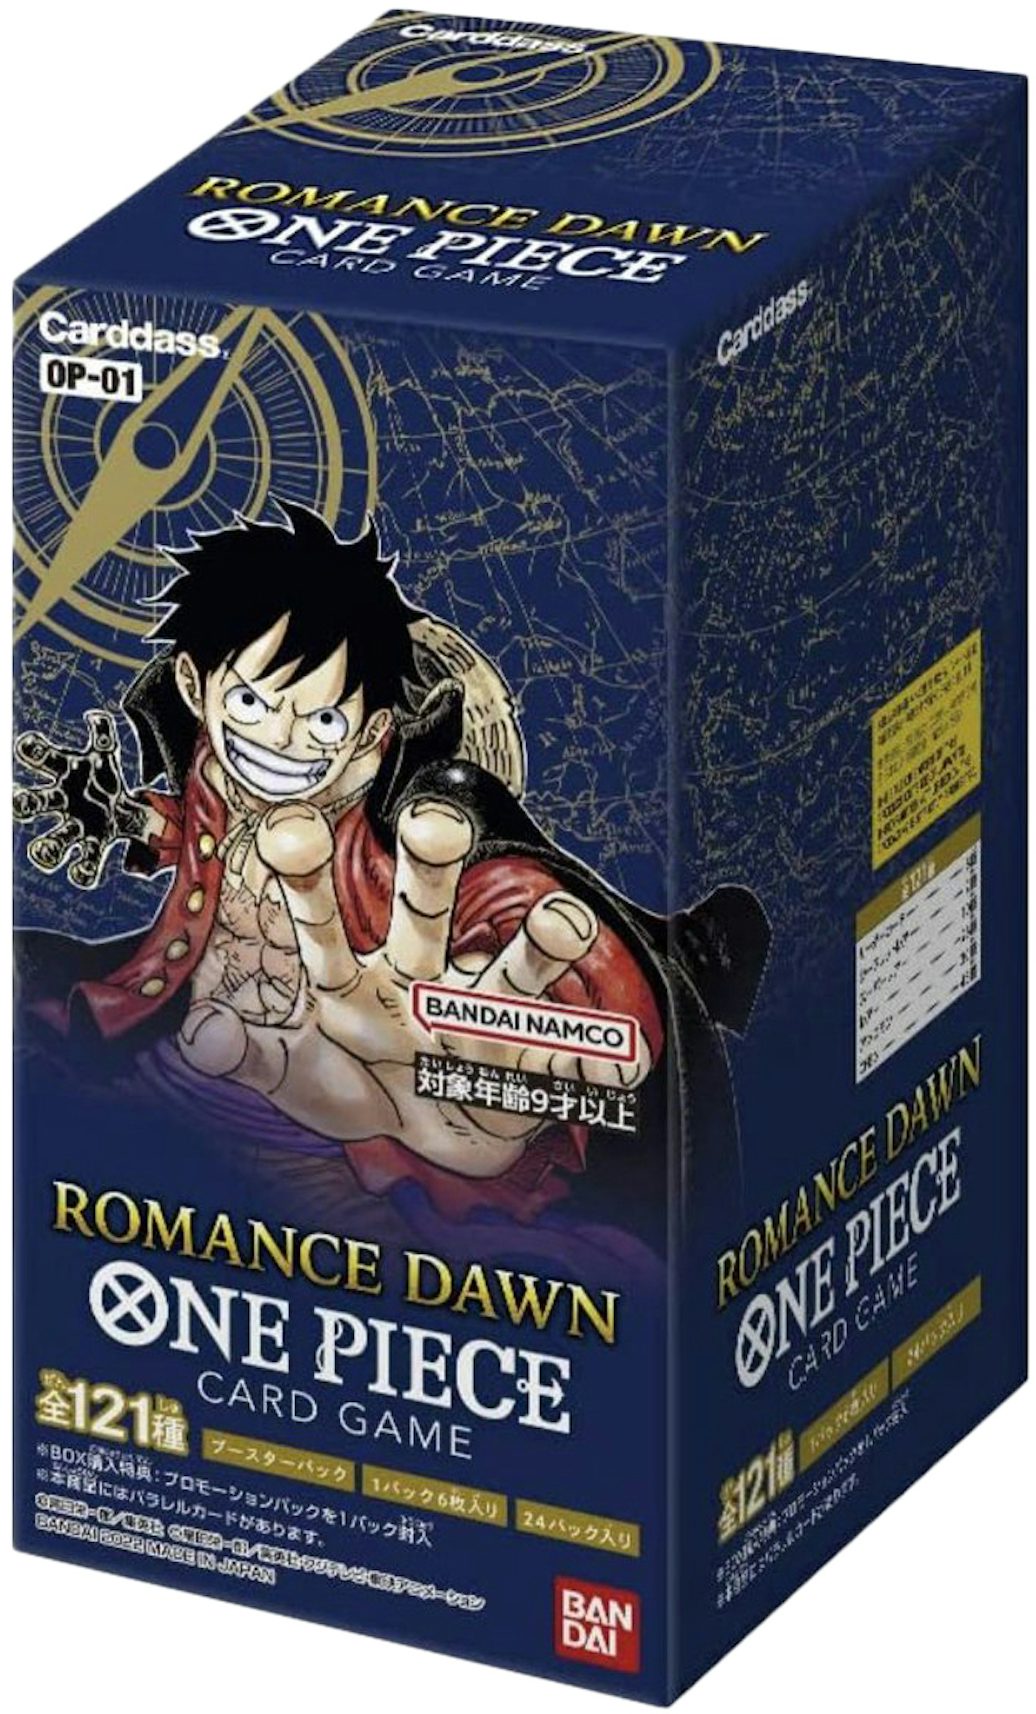 https://images.stockx.com/images/Bandai-One-Piece-Card-Game-Romance-Dawn-Carddass-Booster-Box-OP-01-Japanese-Updated.jpg?fit=fill&bg=FFFFFF&w=1200&h=857&fm=jpg&auto=compress&dpr=2&trim=color&updated_at=1674098620&q=60